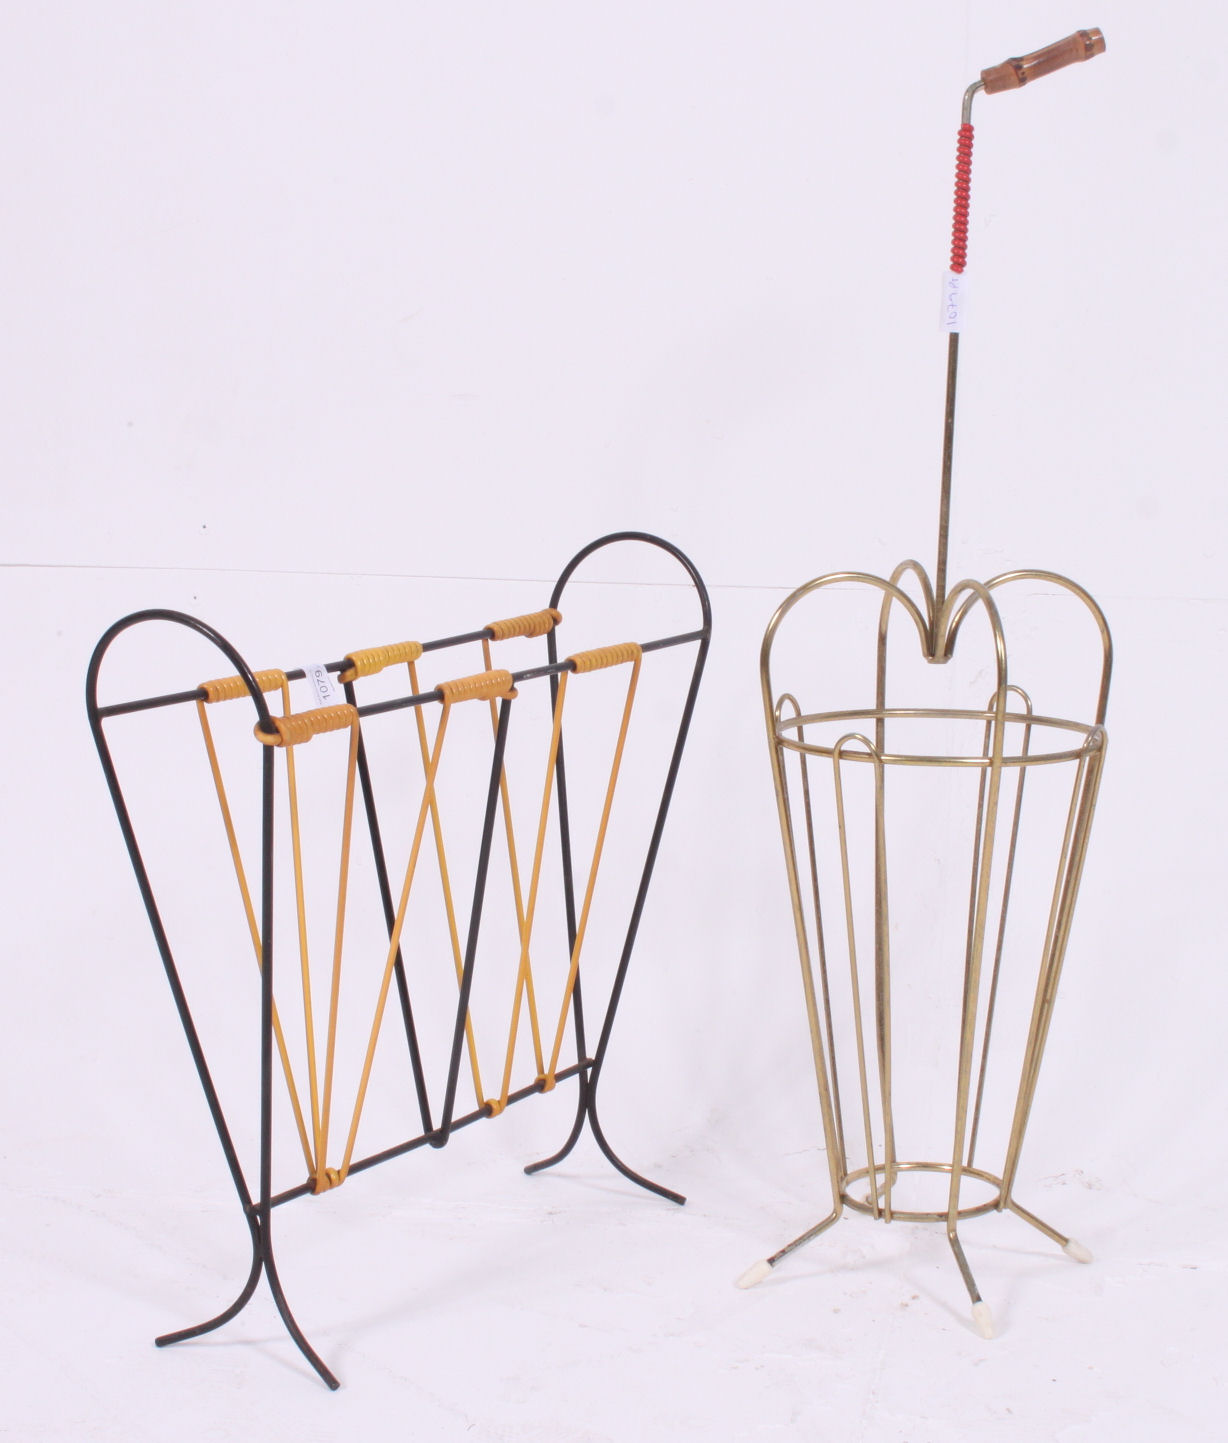 A retro 1950's wire work two tone black and yellow magazine rack together with a metal wire work